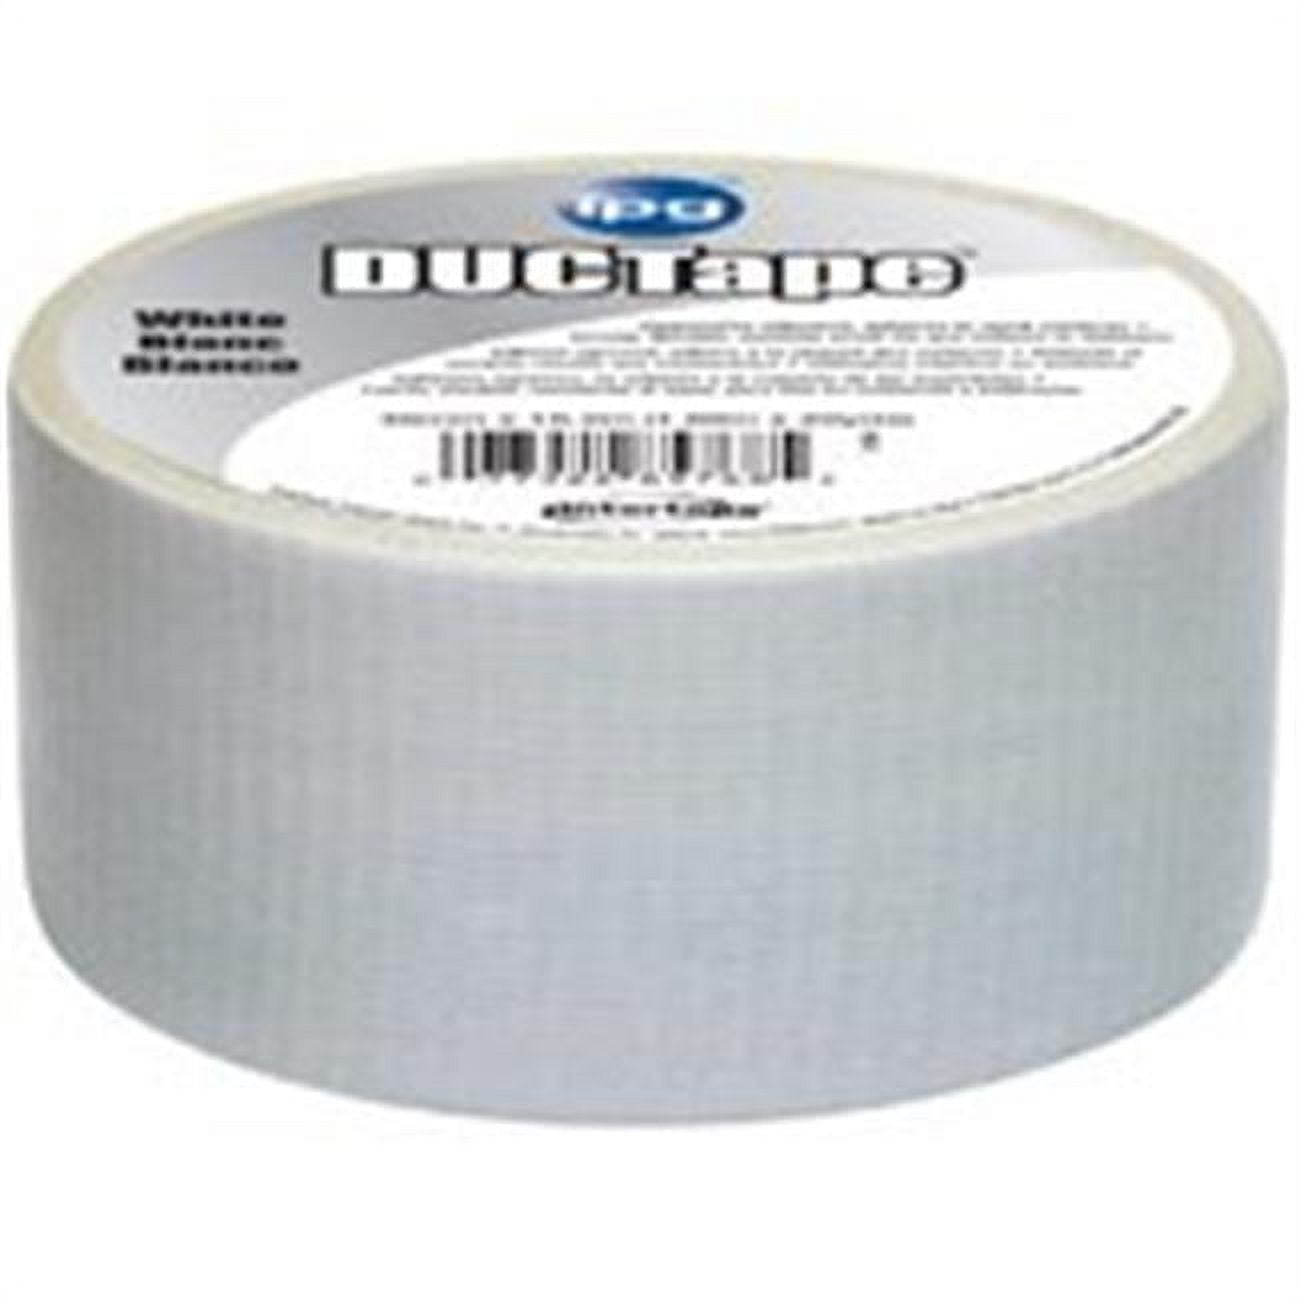  Duct Tape White